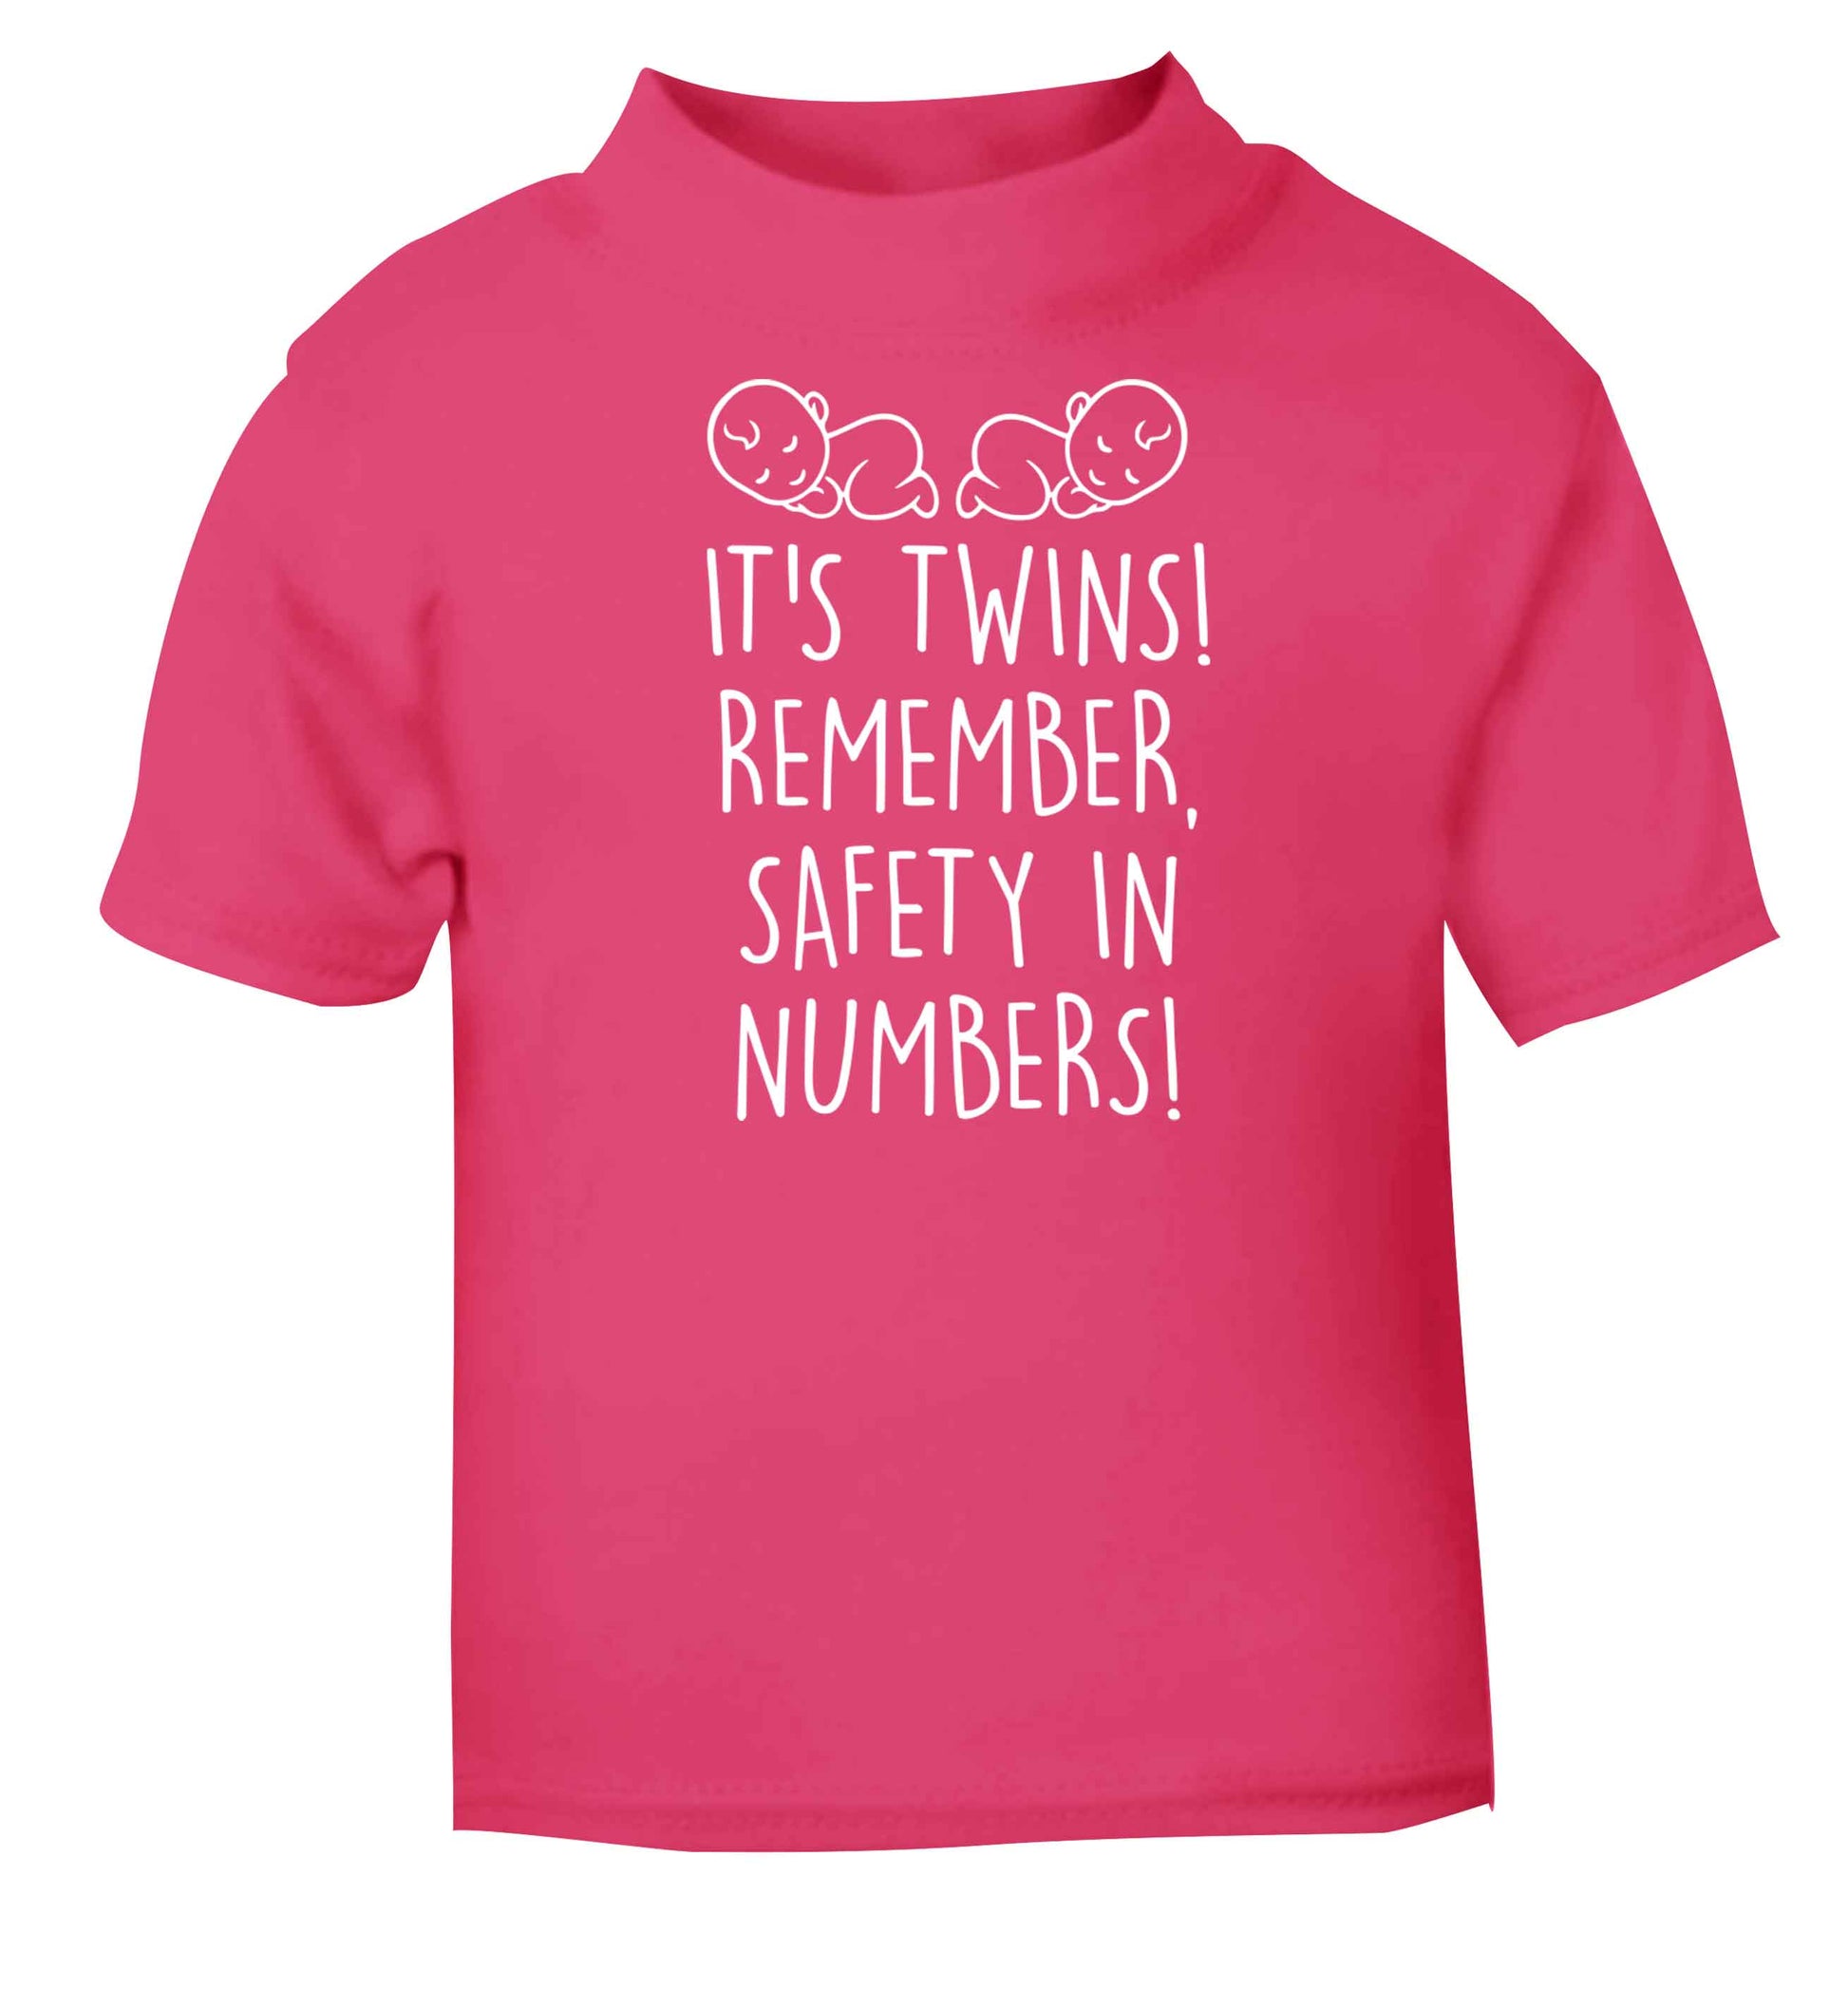 It's twins! Remember safety in numbers! pink baby toddler Tshirt 2 Years